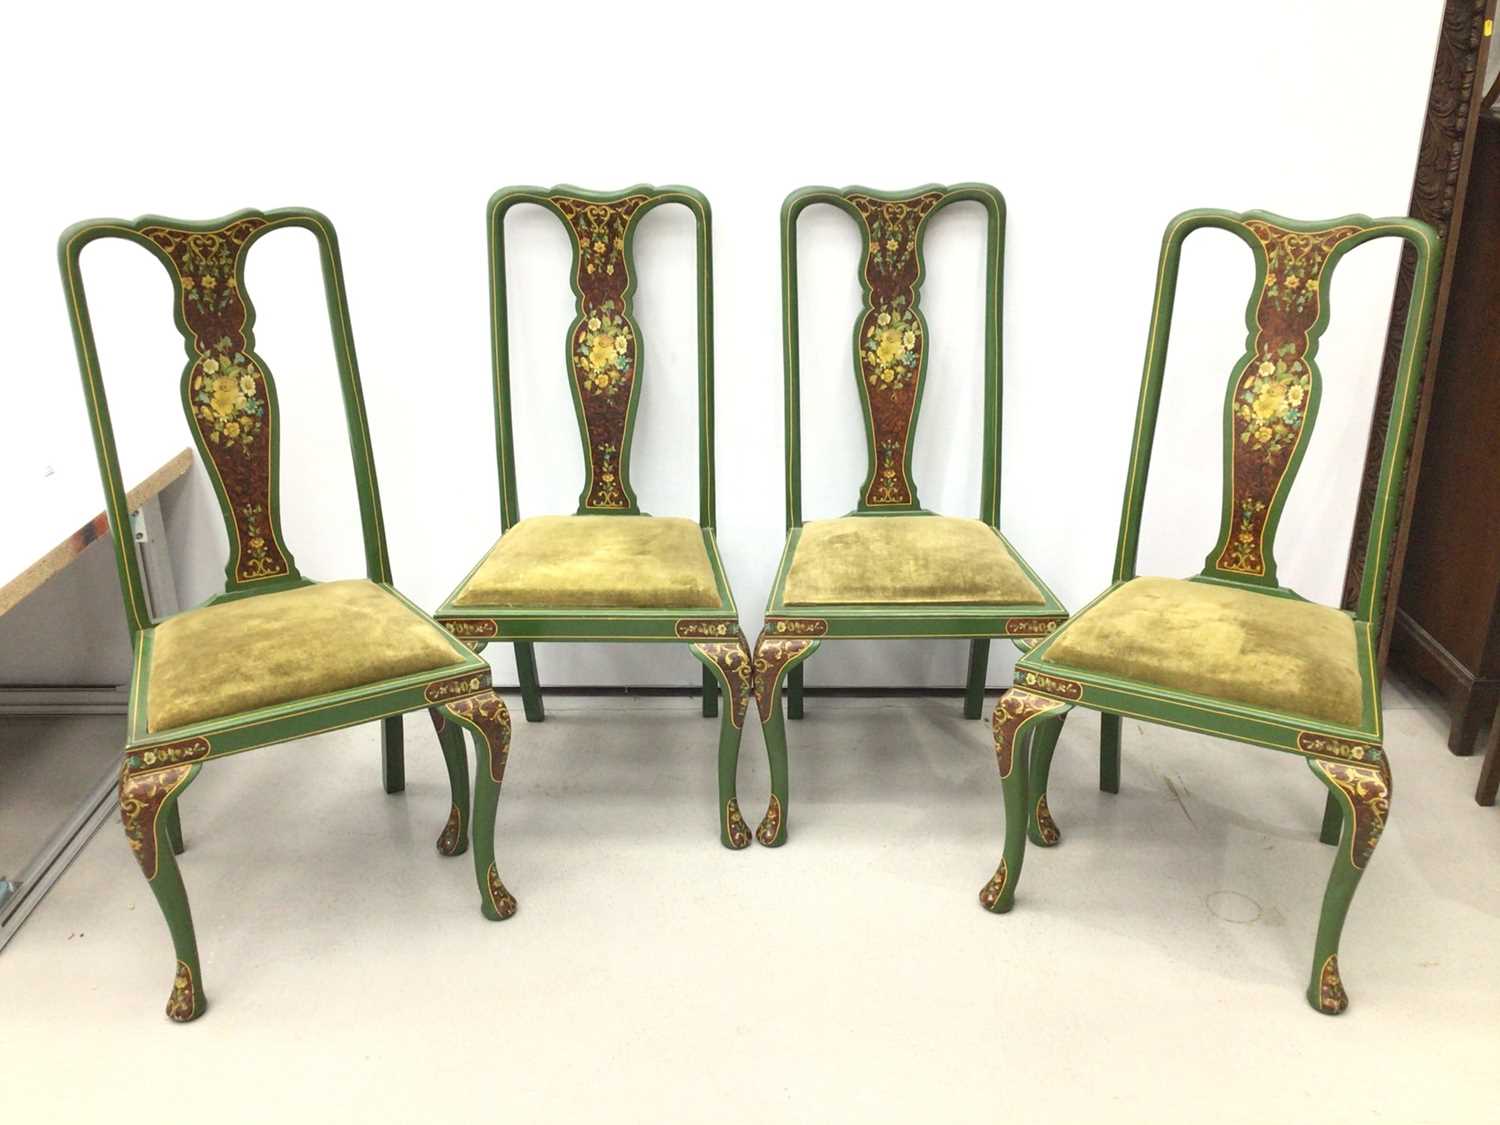 Set of four green painted dining chairs with two rush seated chairs